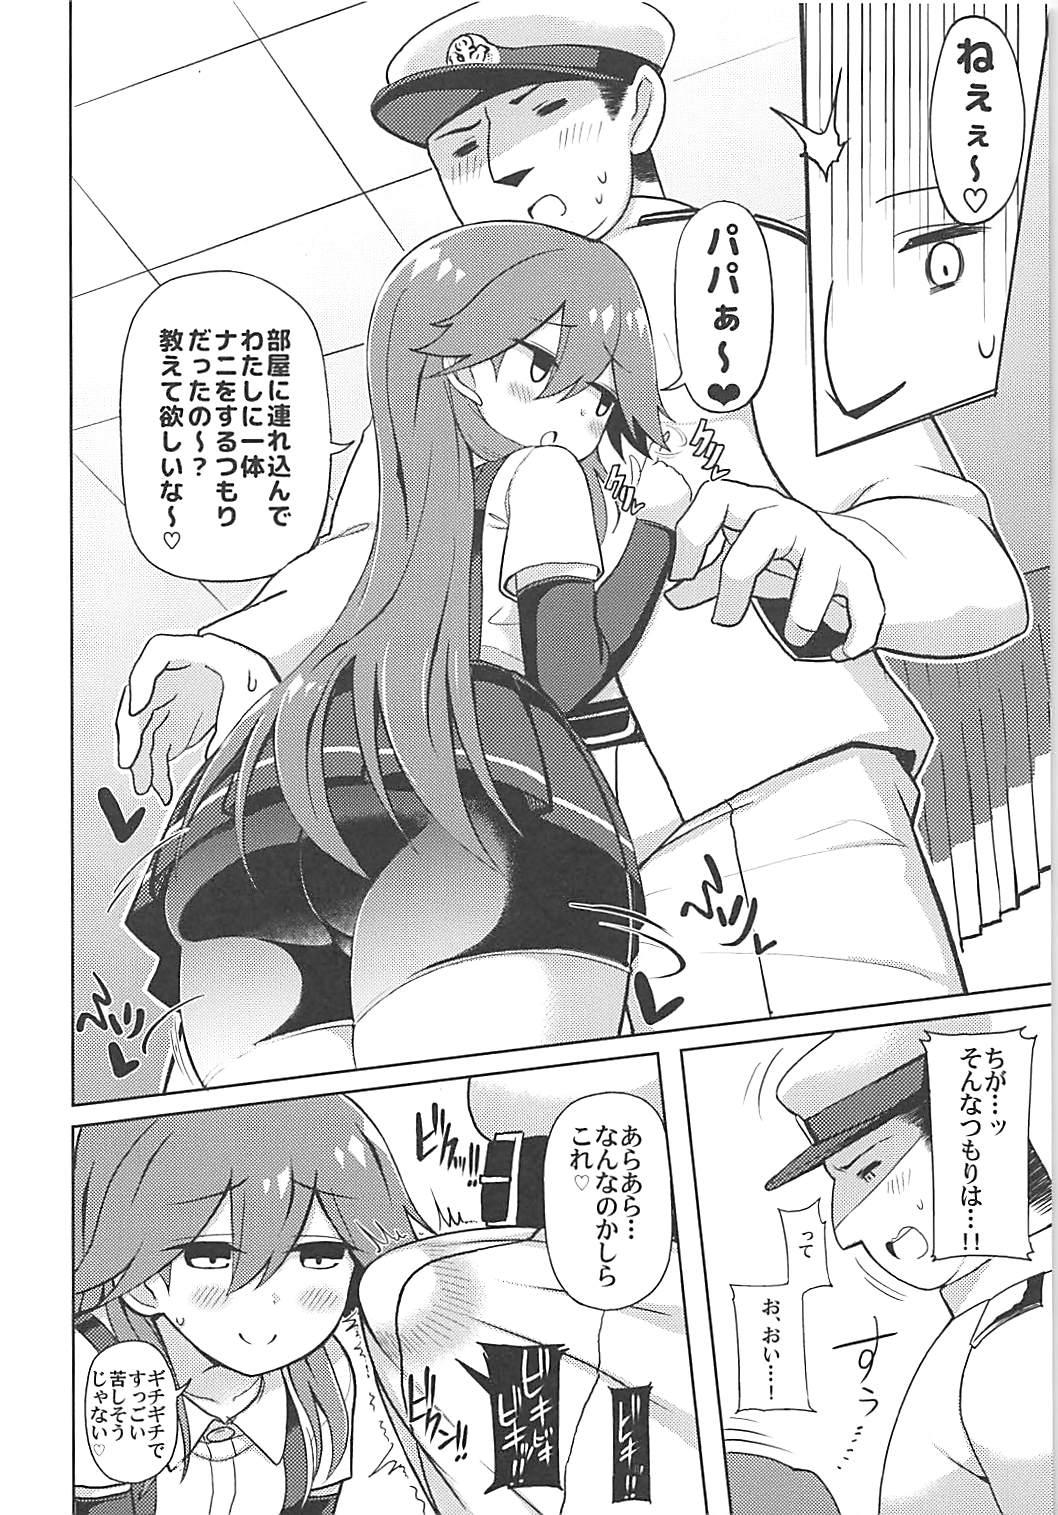 Price Little Girl Sweet Trap! - Kantai collection Celebrity Sex Scene - Page 5